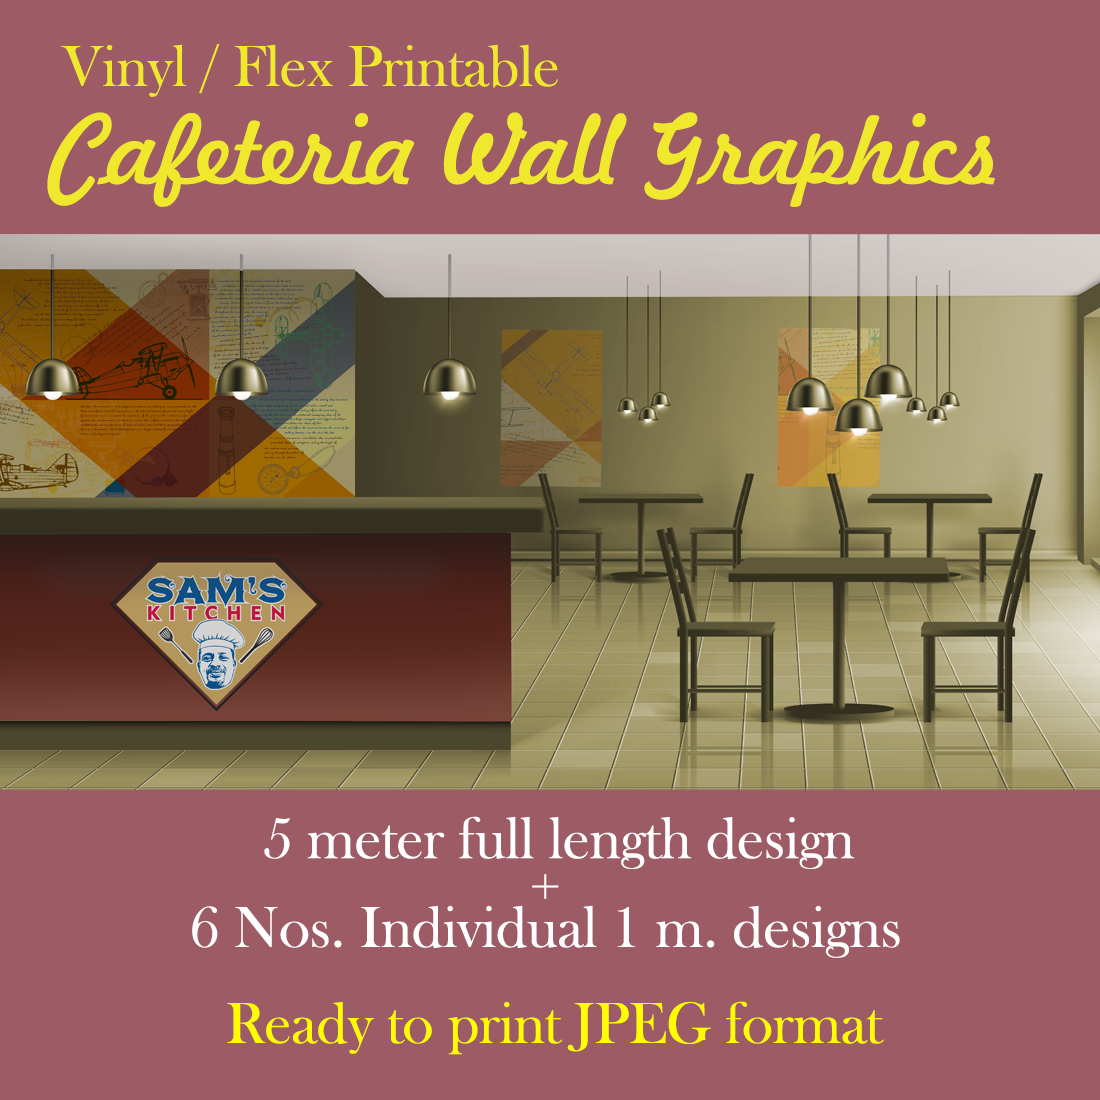 Cafeteria wall graphics preview image.